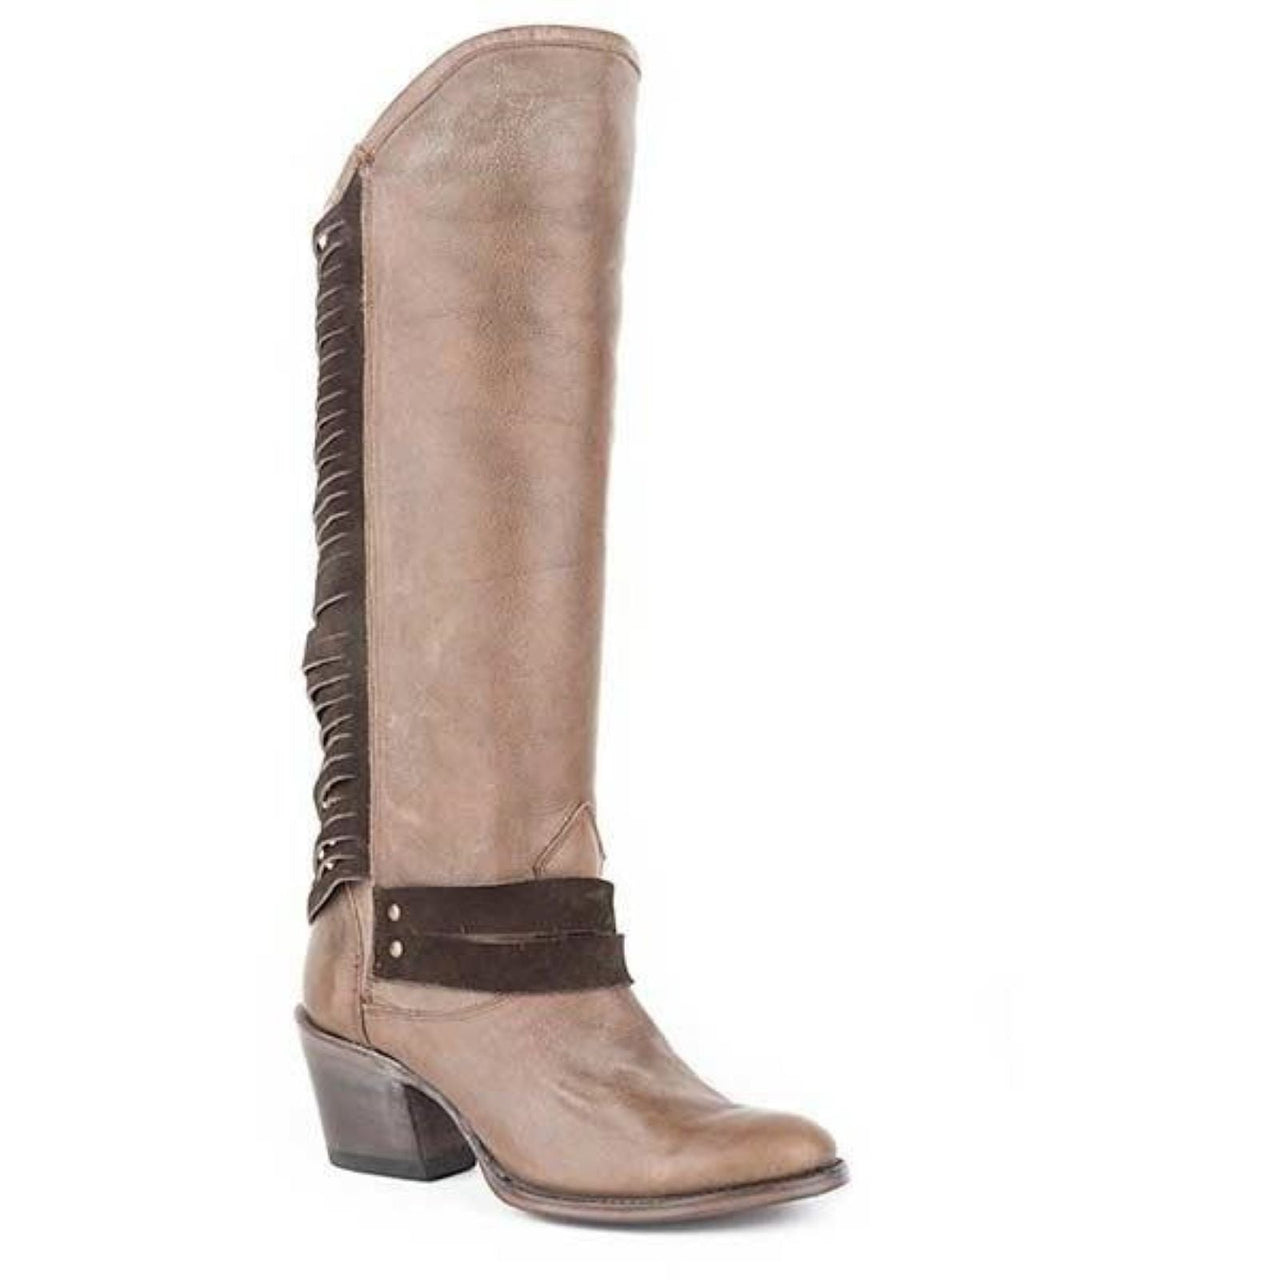 Women's Stetson Dover Knee High Boots Round Toe Handcrafted Tan - yeehawcowboy